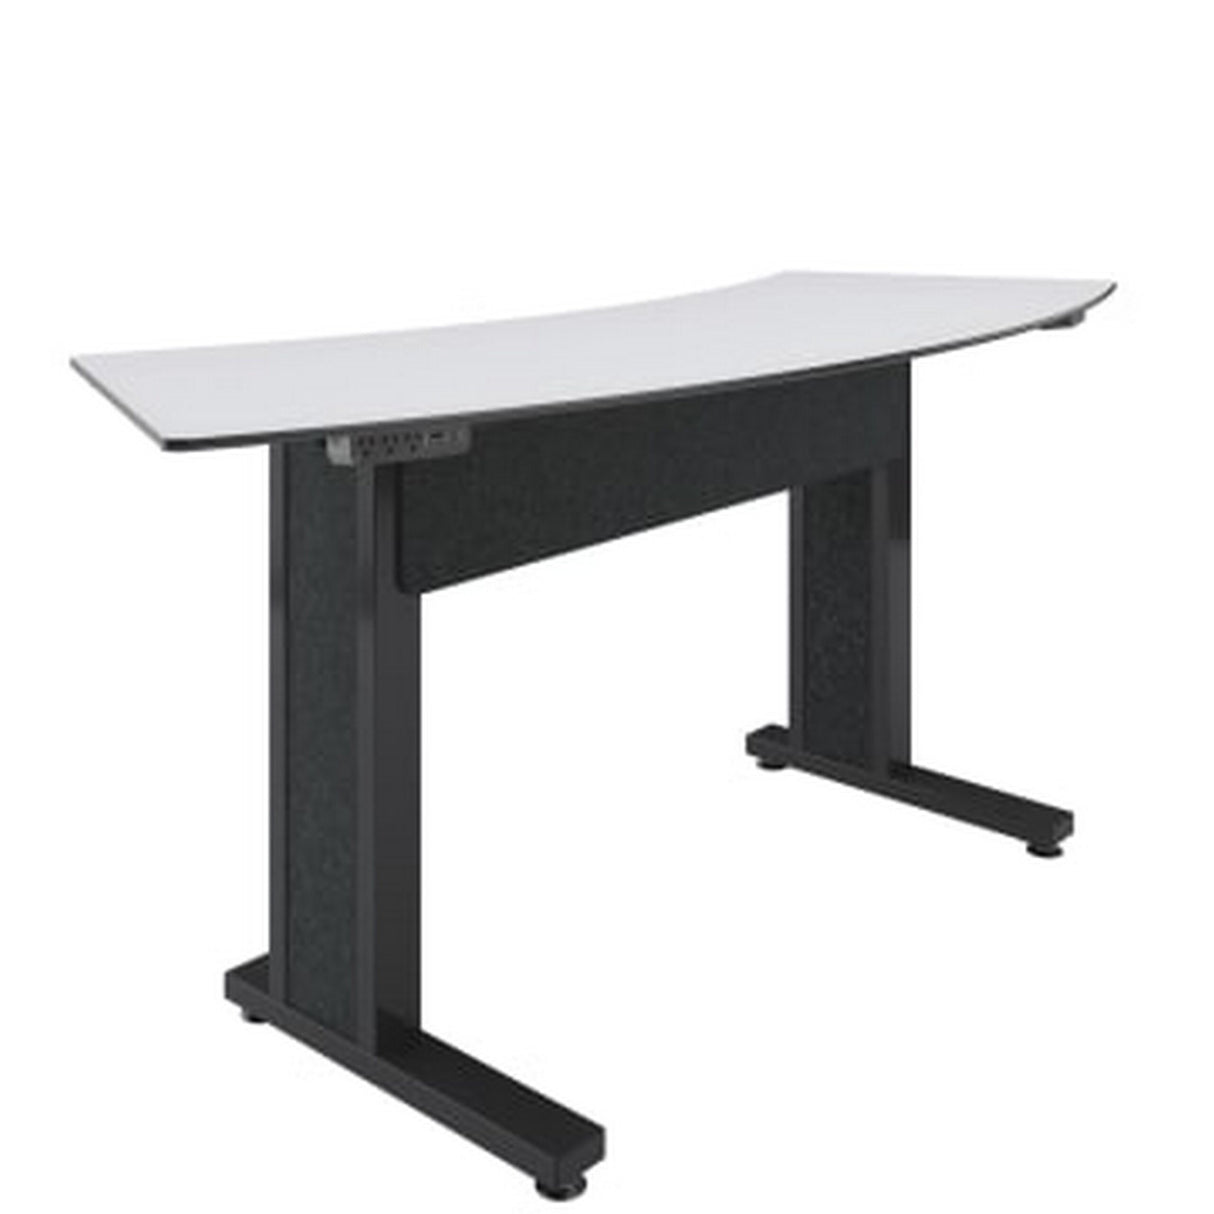 Middle Atlantic TBL-ARC-3P-CH-WB Forum 3 Person Arc Table, Counter Height, Dark Finish, 38 Inch